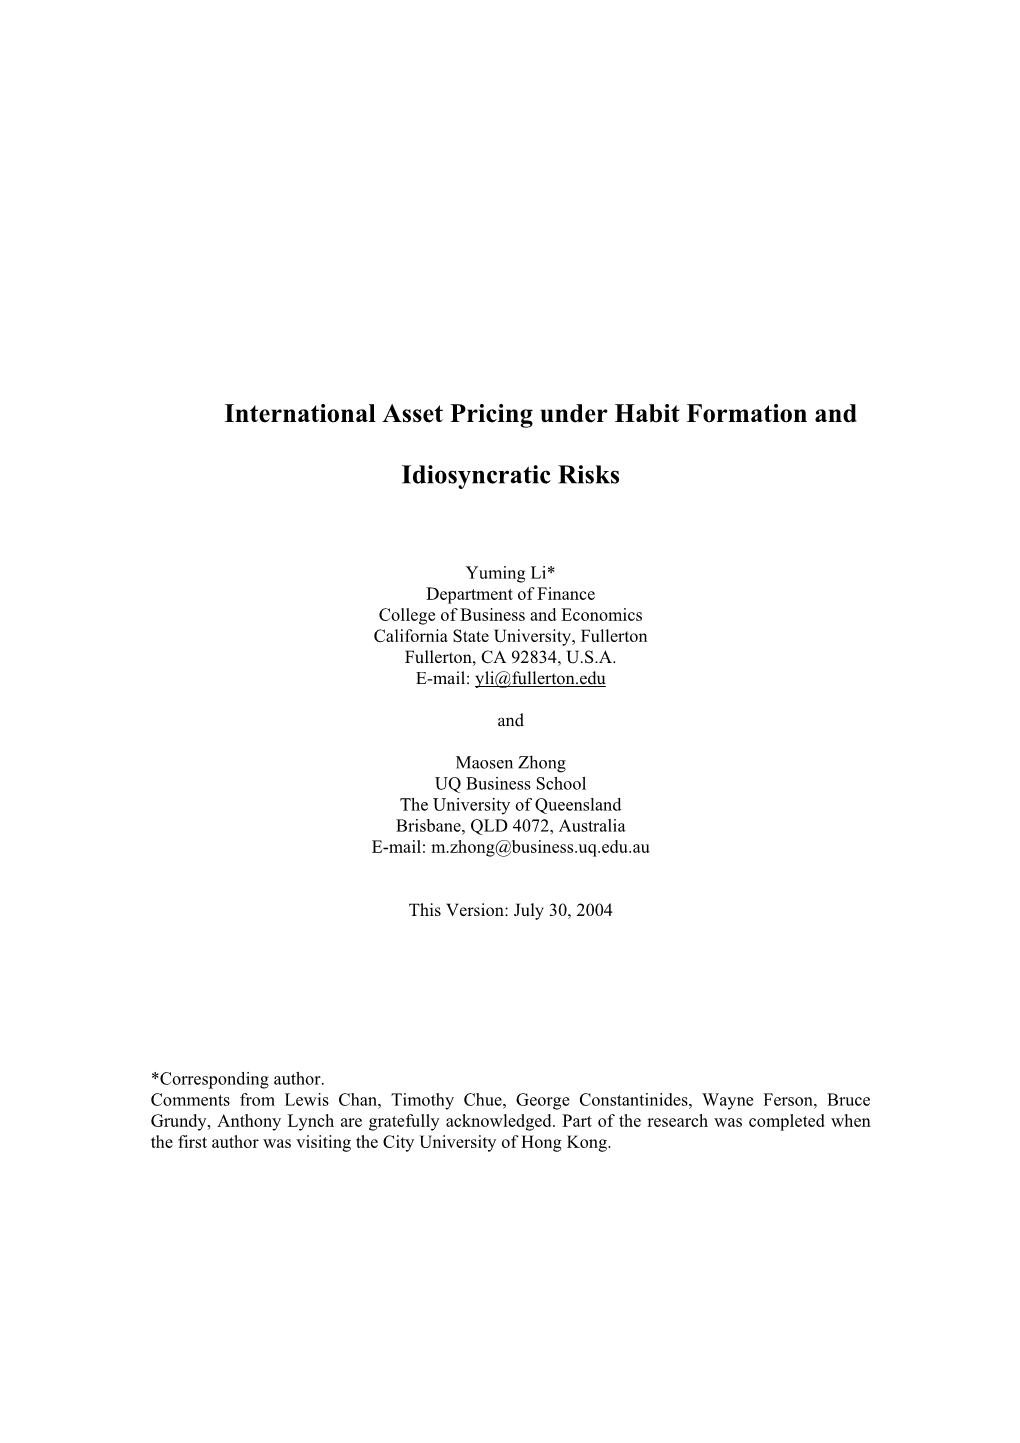 International Asset Pricing Under Habit Formation and Idiosyncratic Risks